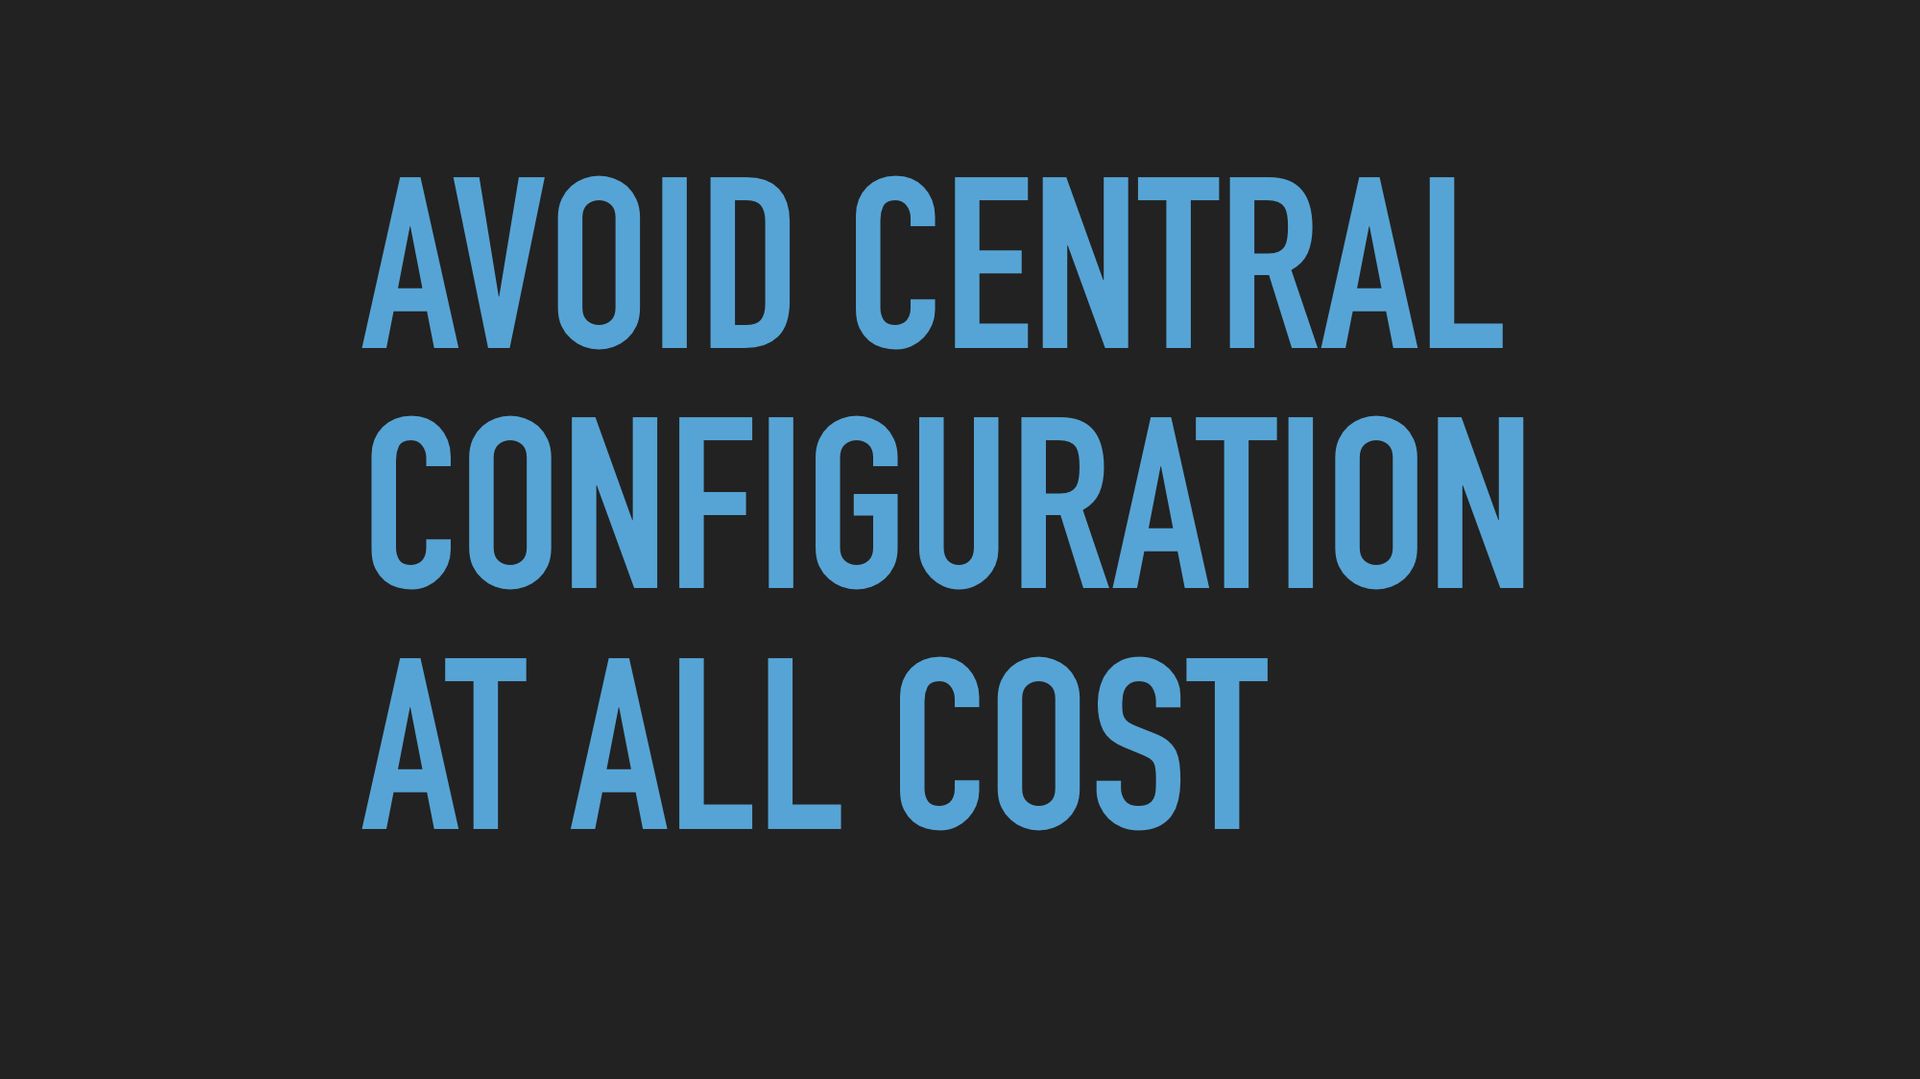 Slide text: Avoid central configuration at all cost